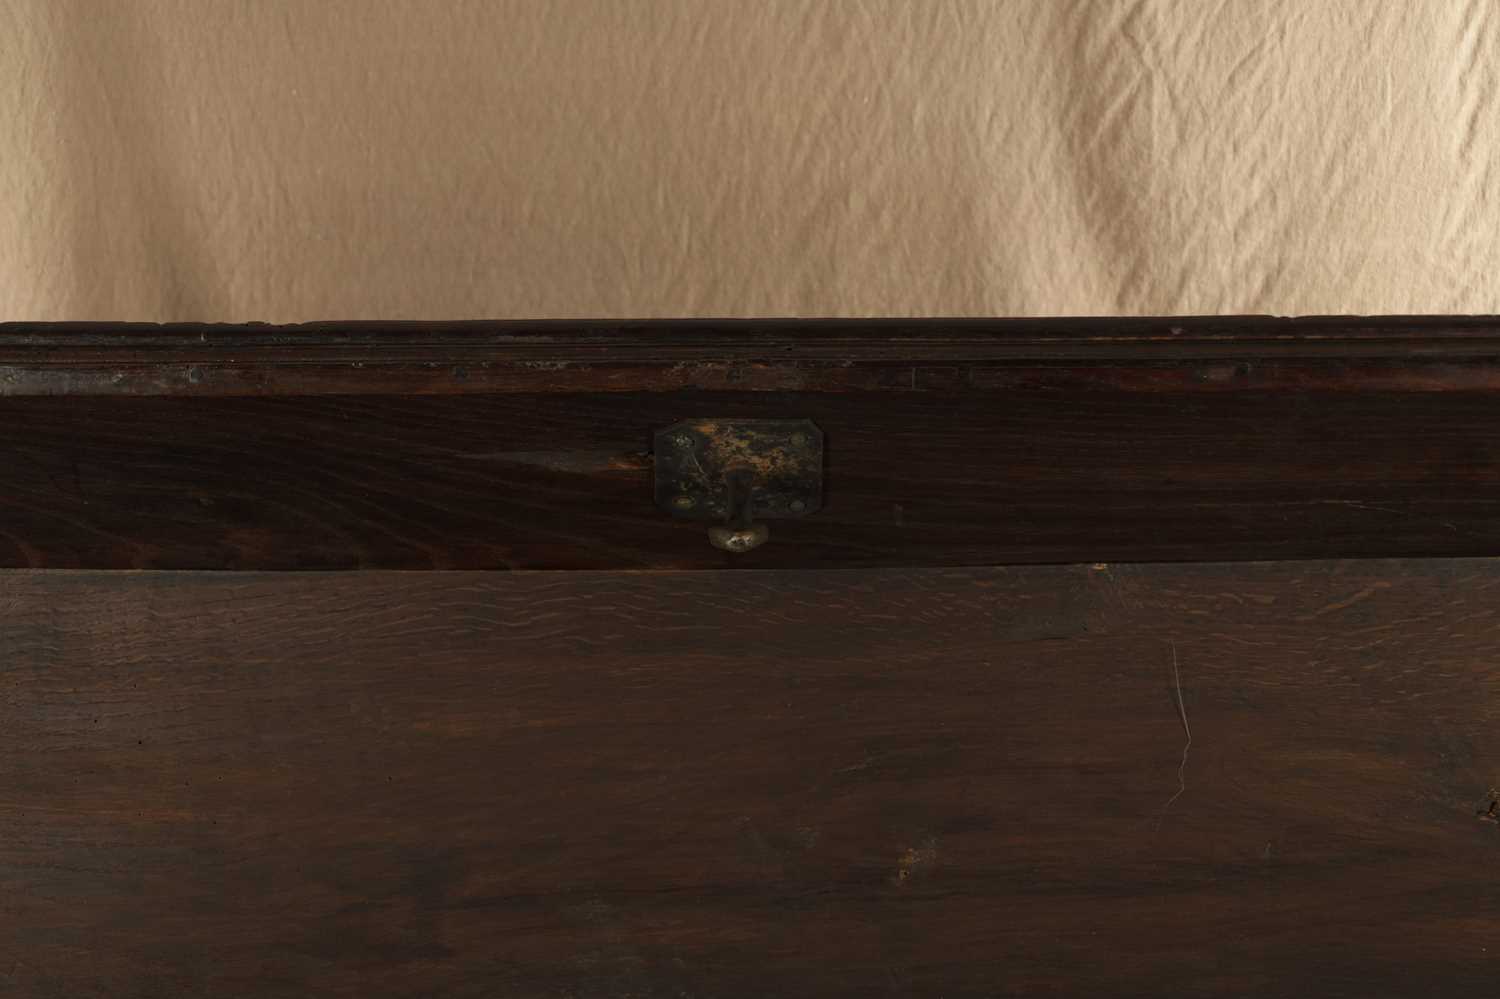 AN EARLY 18TH CENTURY FLEMISH OAK KIST DATED 1718 - Image 8 of 10